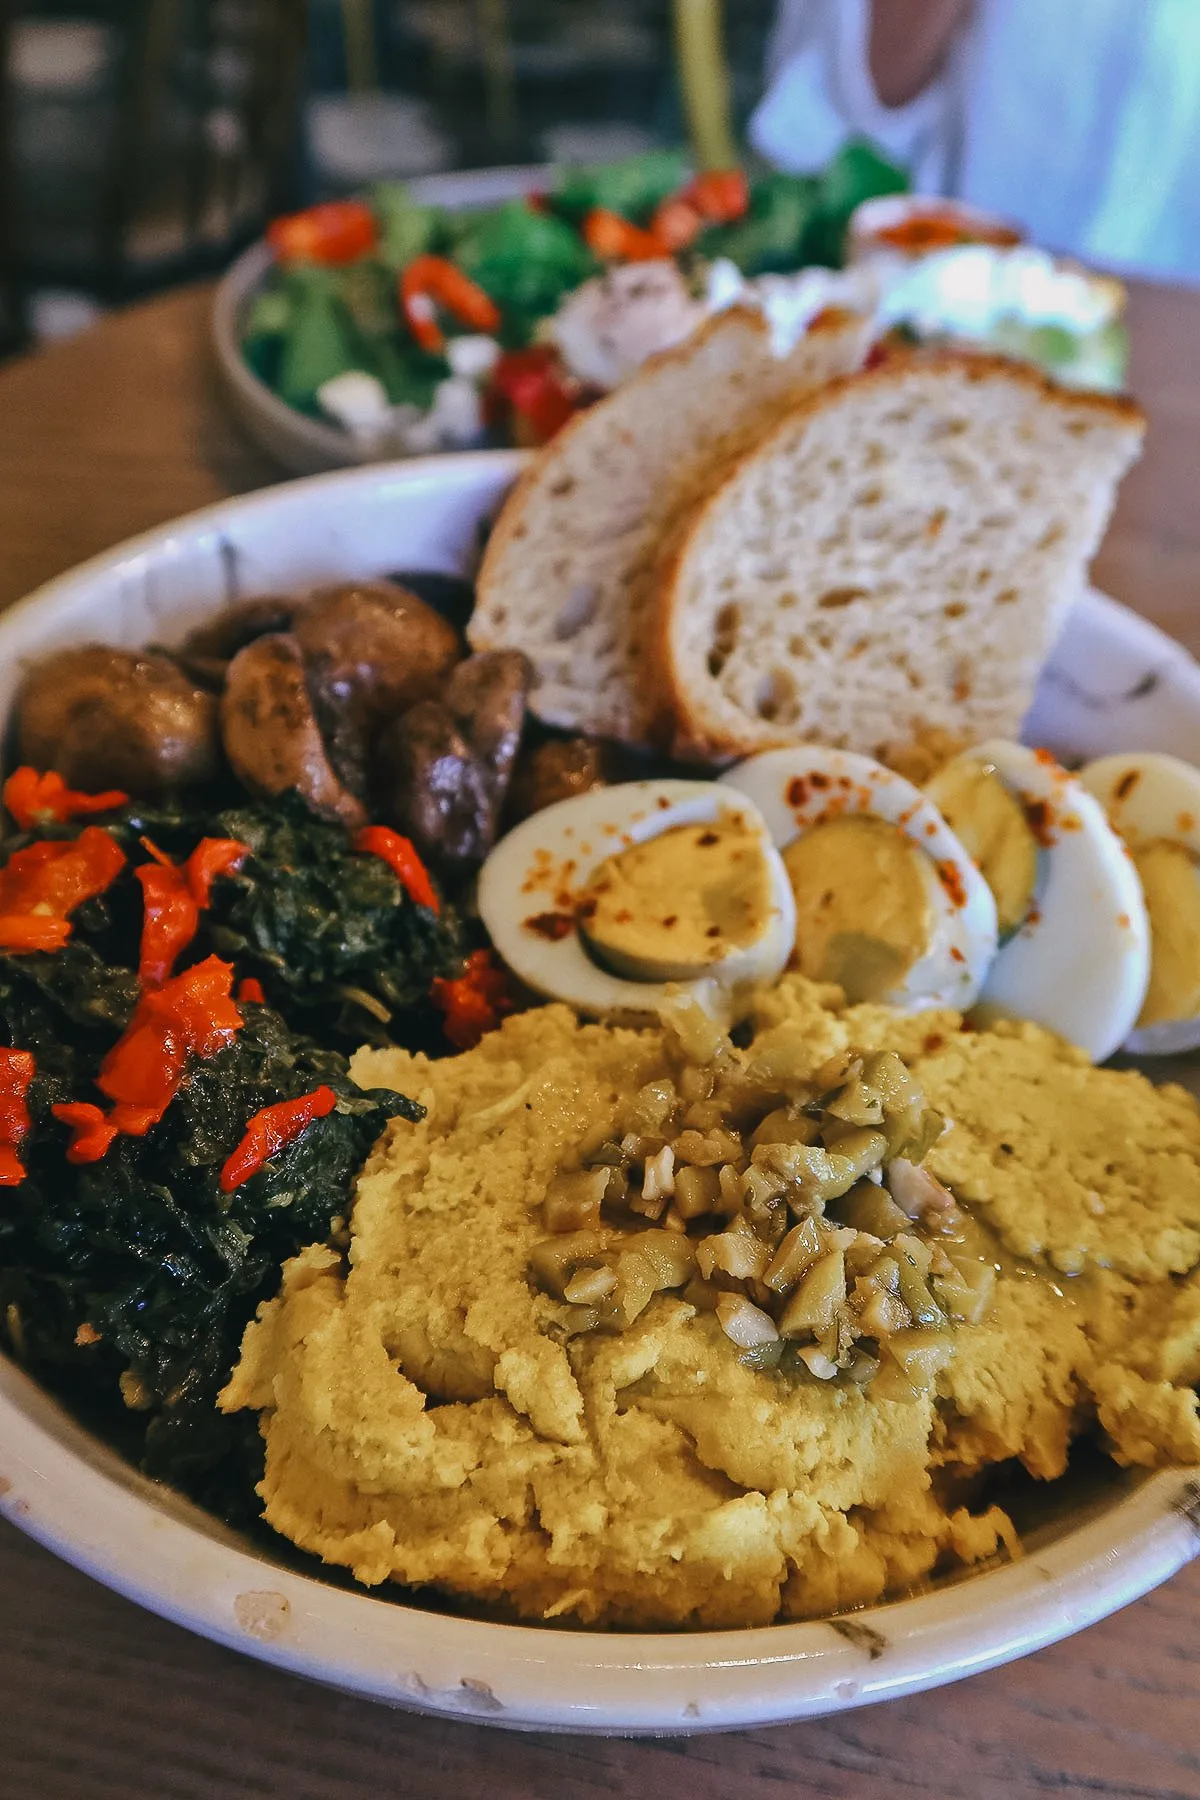 Hummus platter at a restaurant in Istanbul